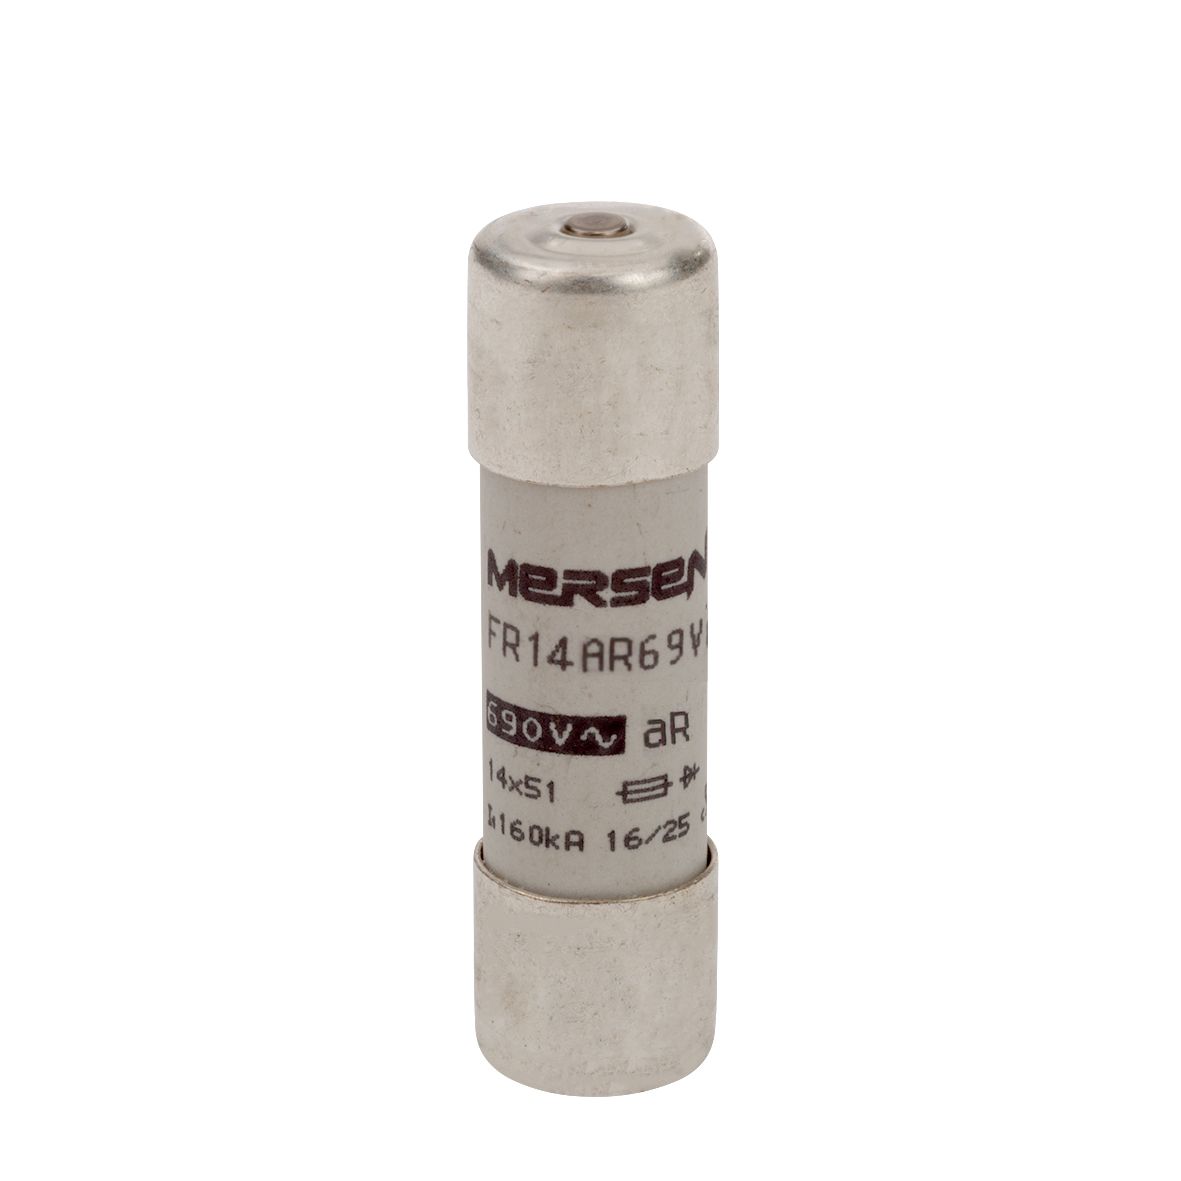 T1056660 - Cylindrical fuse-link aR 690VAC 14x51, 16A, with indicator